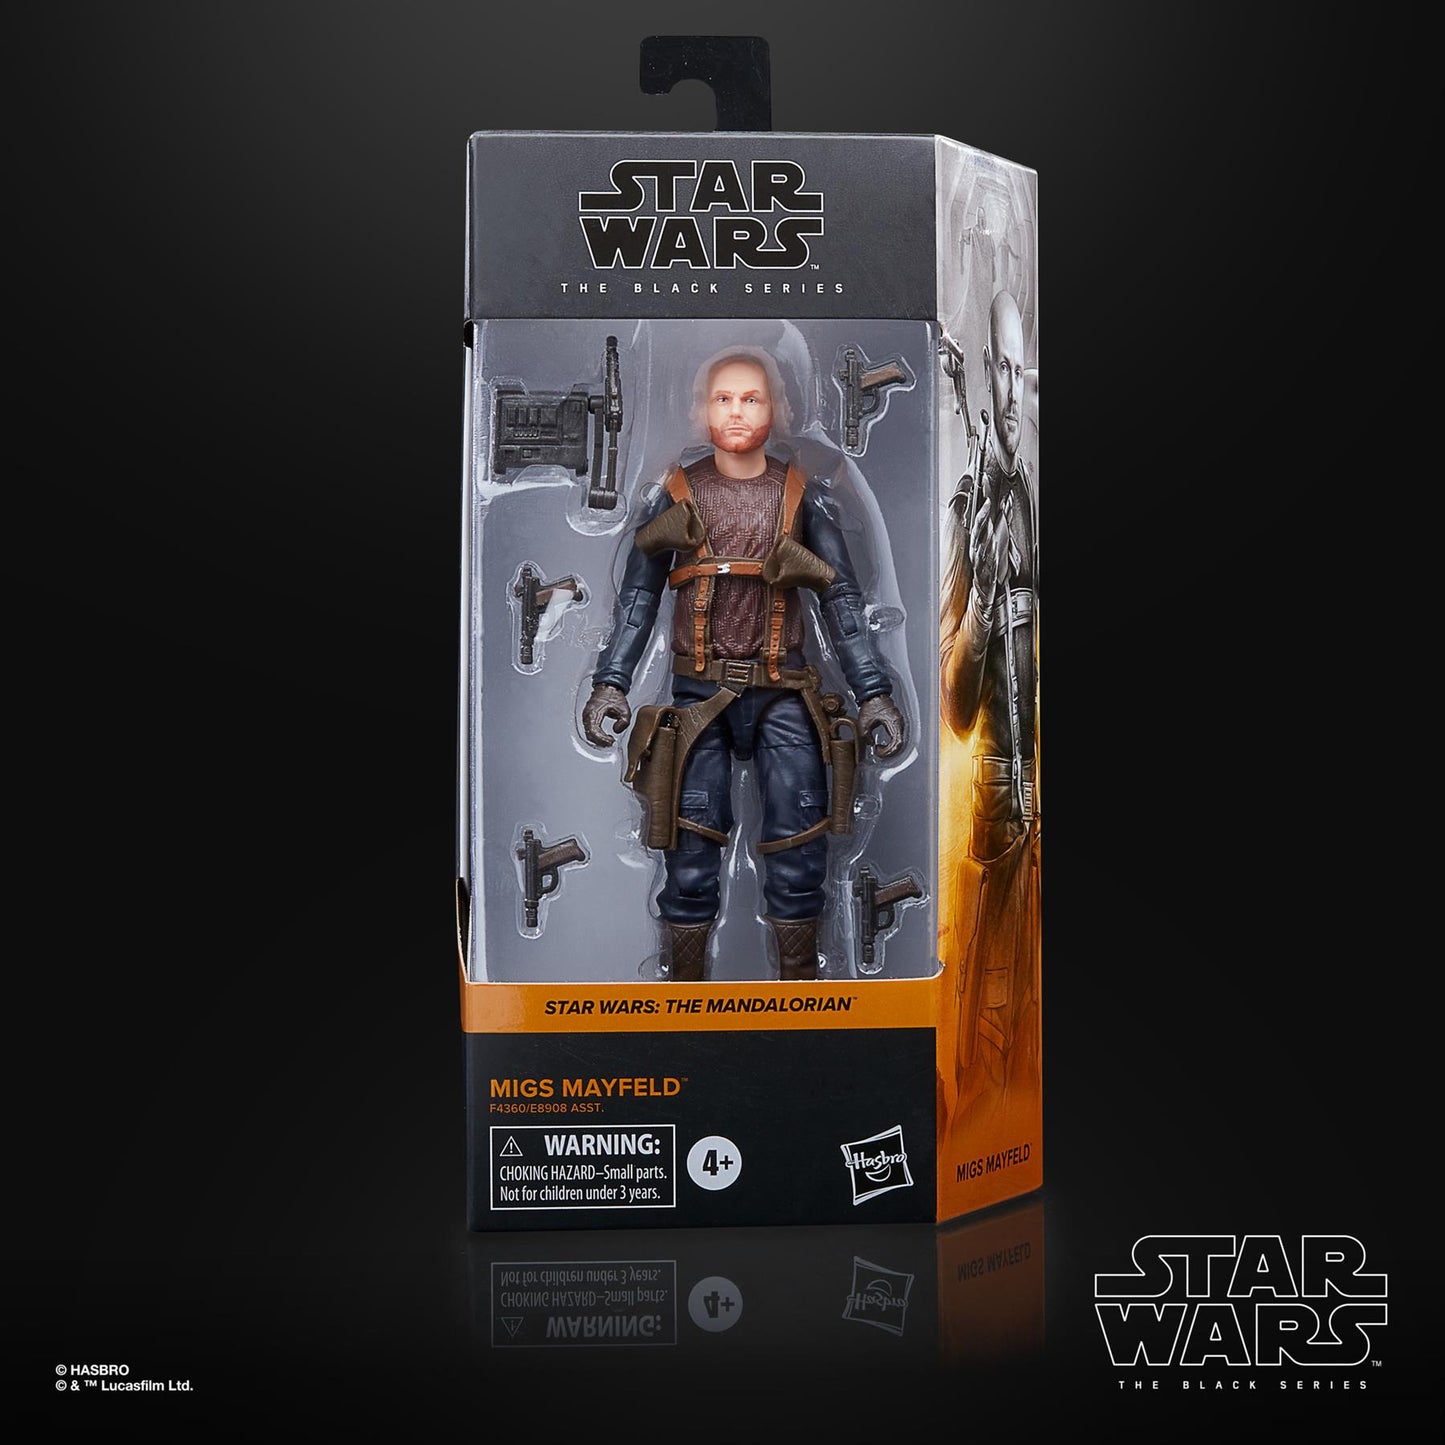 Sstar Wars Mand Black 6in Migs Mayfield Action Figure